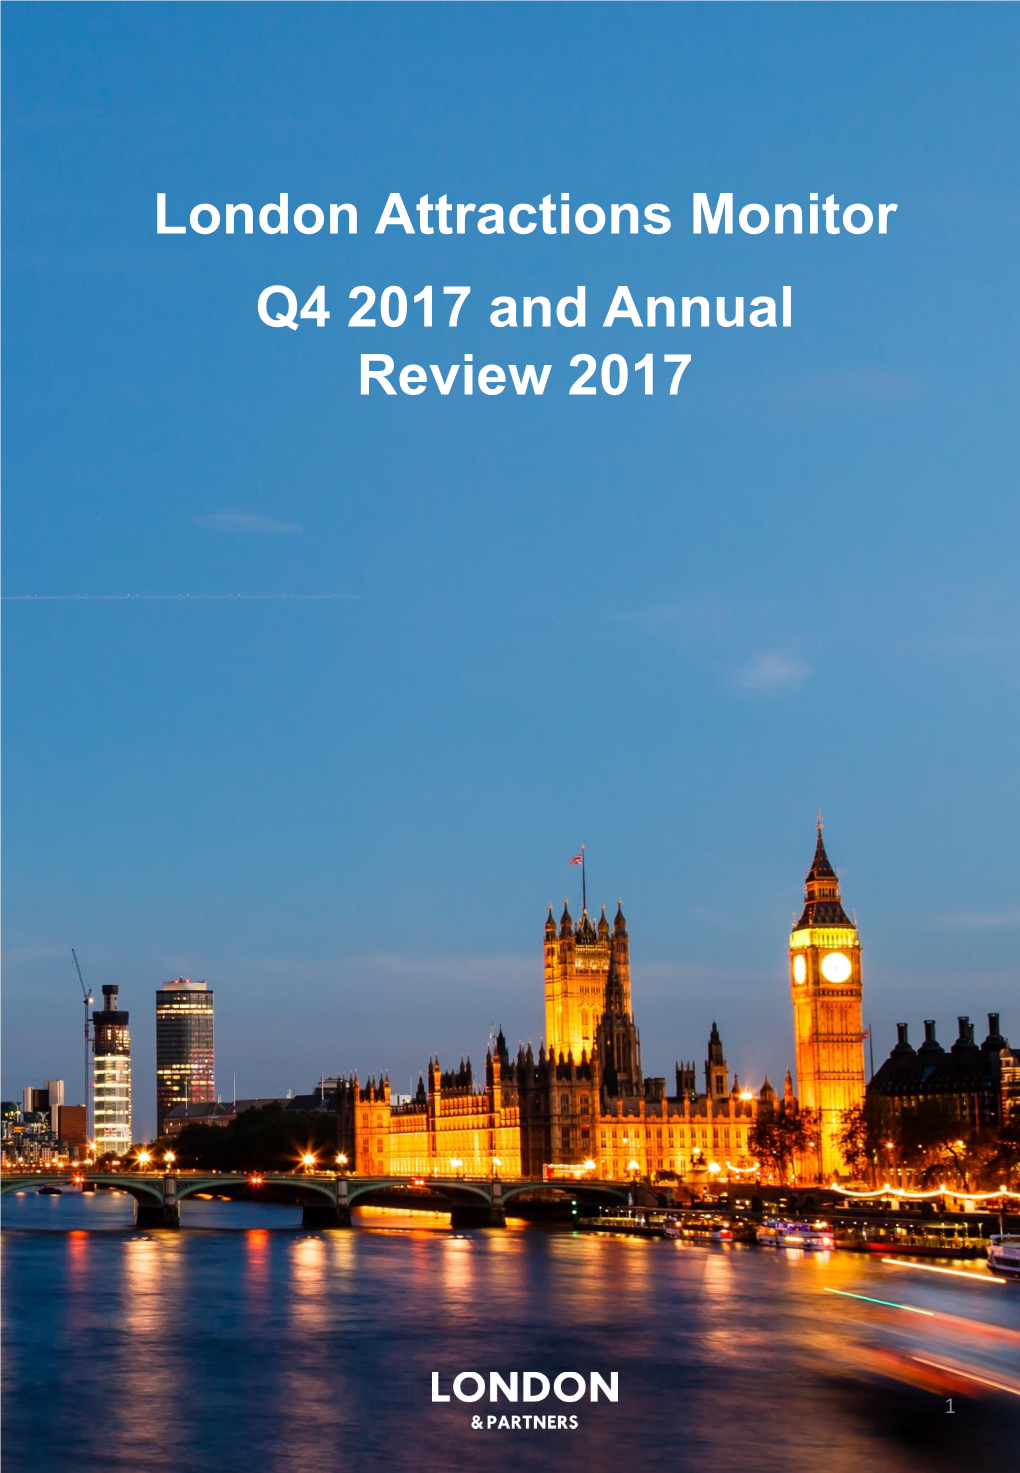 London Attractions Monitor 2017